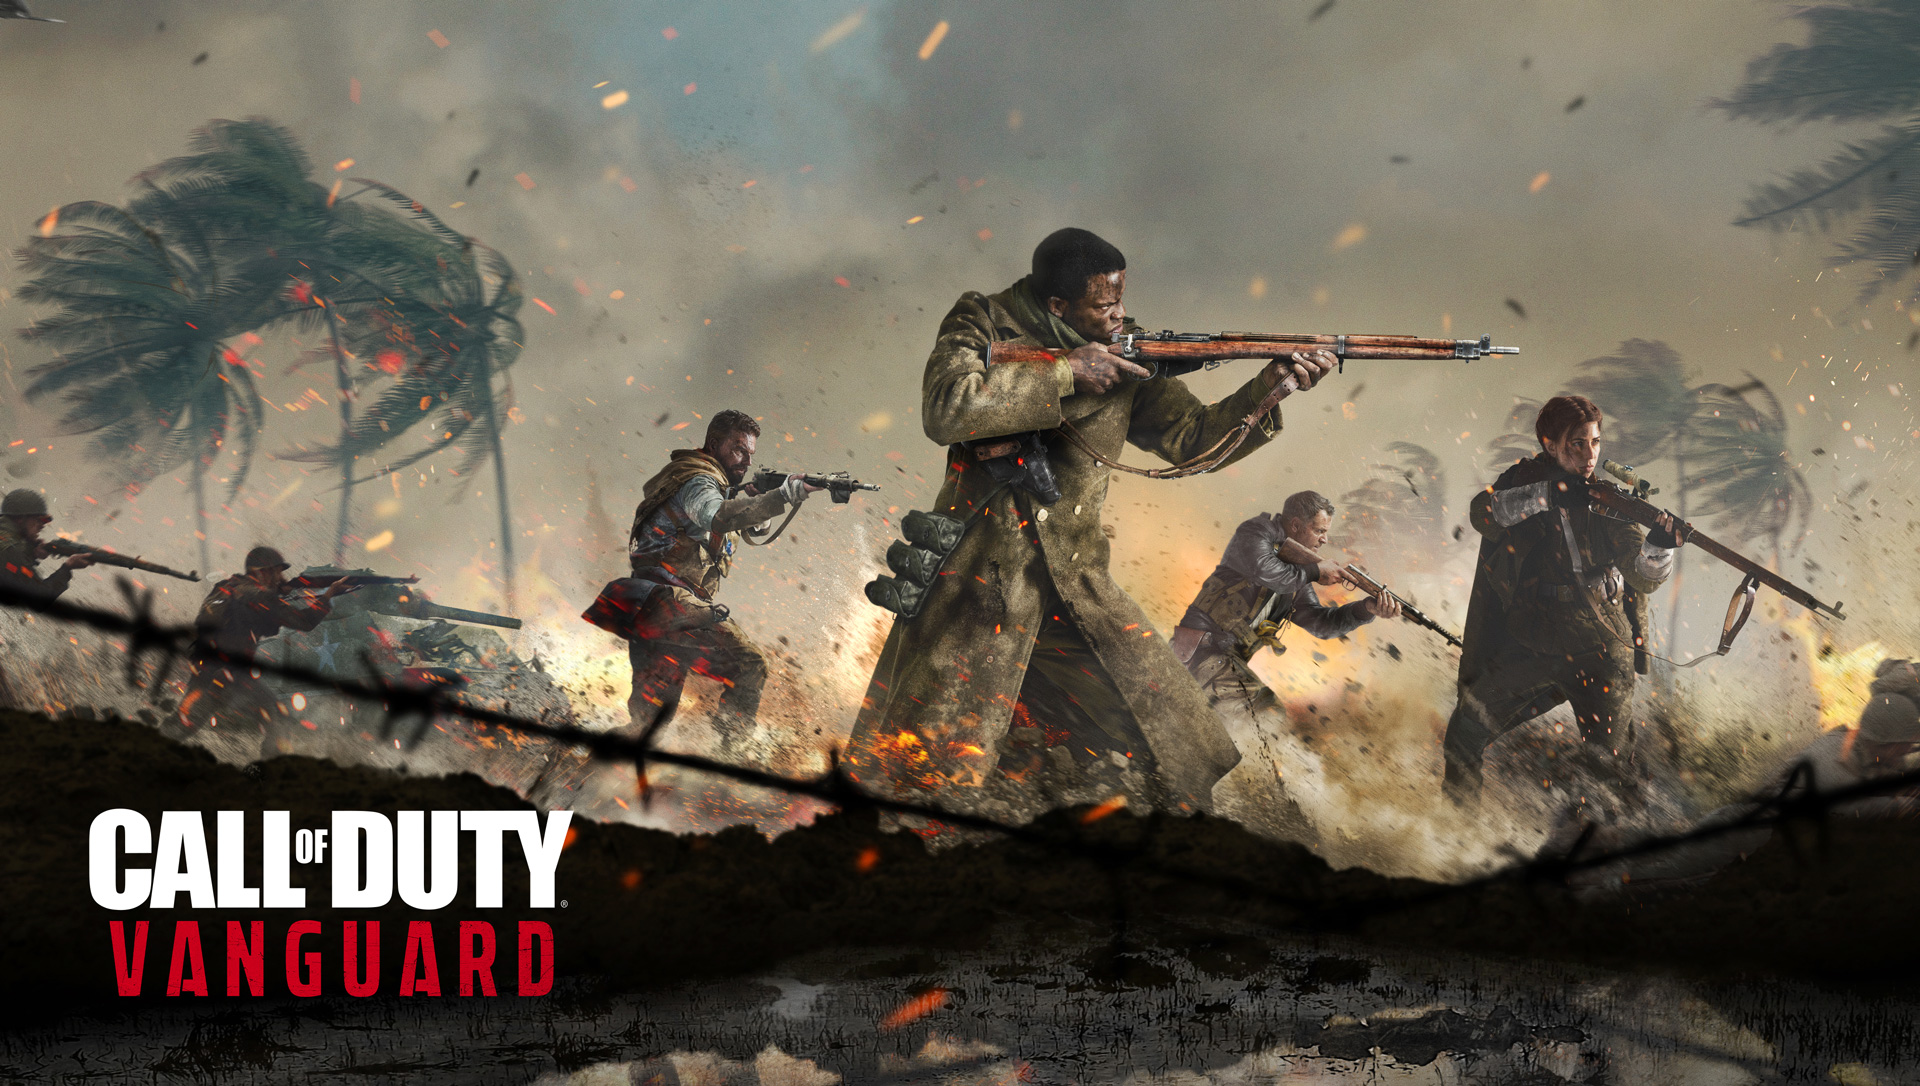 Call of Duty: Vanguard release date, trailer, news and more | TechRadar